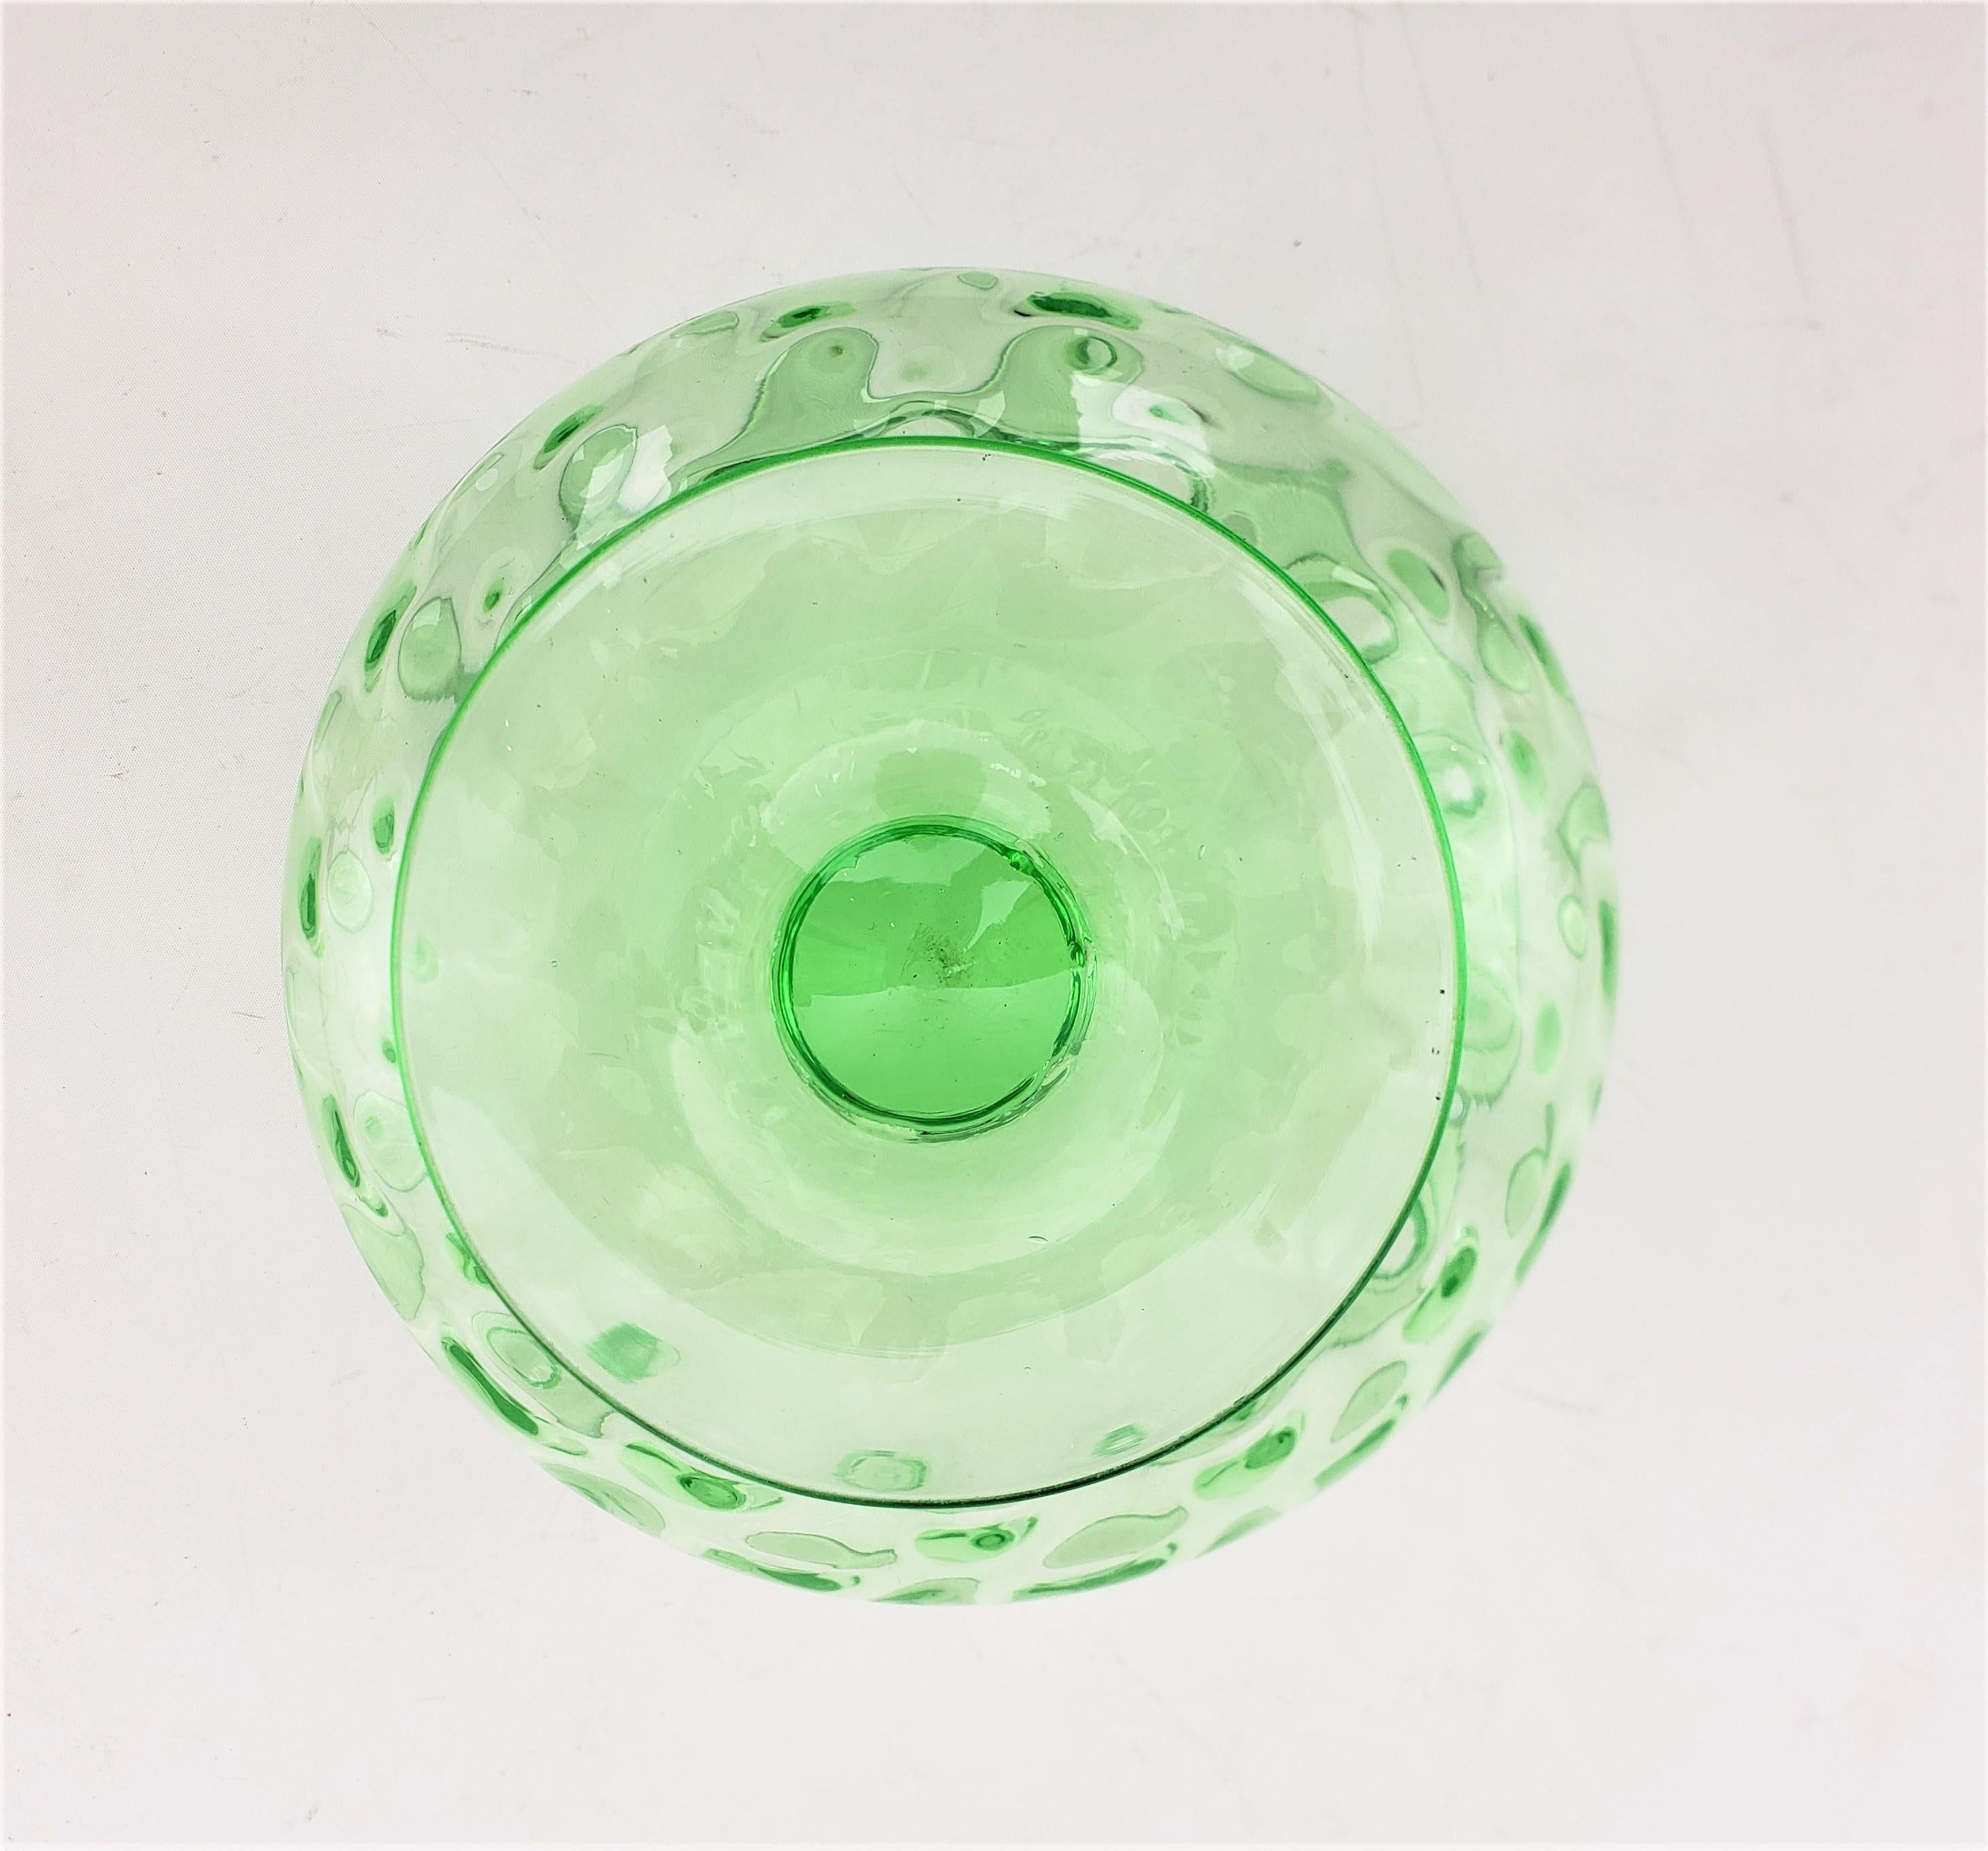 Large Antique Green Uranium Glass Pedestal Bowl with Raised Sides In Good Condition For Sale In Hamilton, Ontario